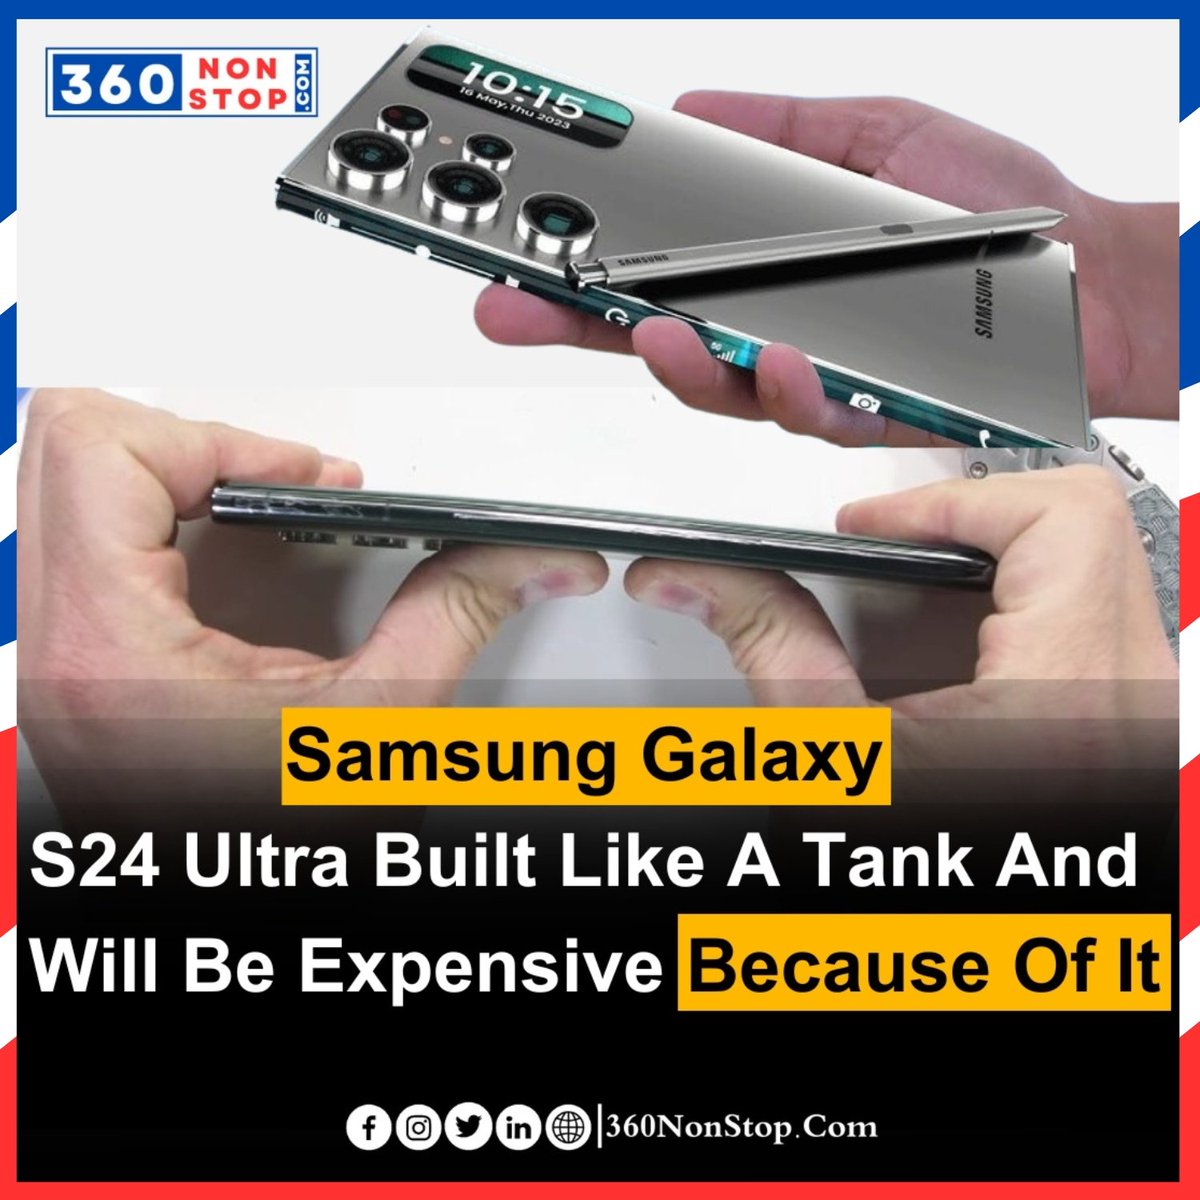 Samsung Galaxy S24 Ultra Built Like A Tank And Will Be Expensive Because Of It.
#SamsungS24Ultra #BuiltLikeATank #PremiumQuality #HighEnd #FlagshipPhone #Durability #ExpensiveButWorthIt #CuttingEdgeTechnology #PowerfulPerformance #LuxuryDevice #360nonstop